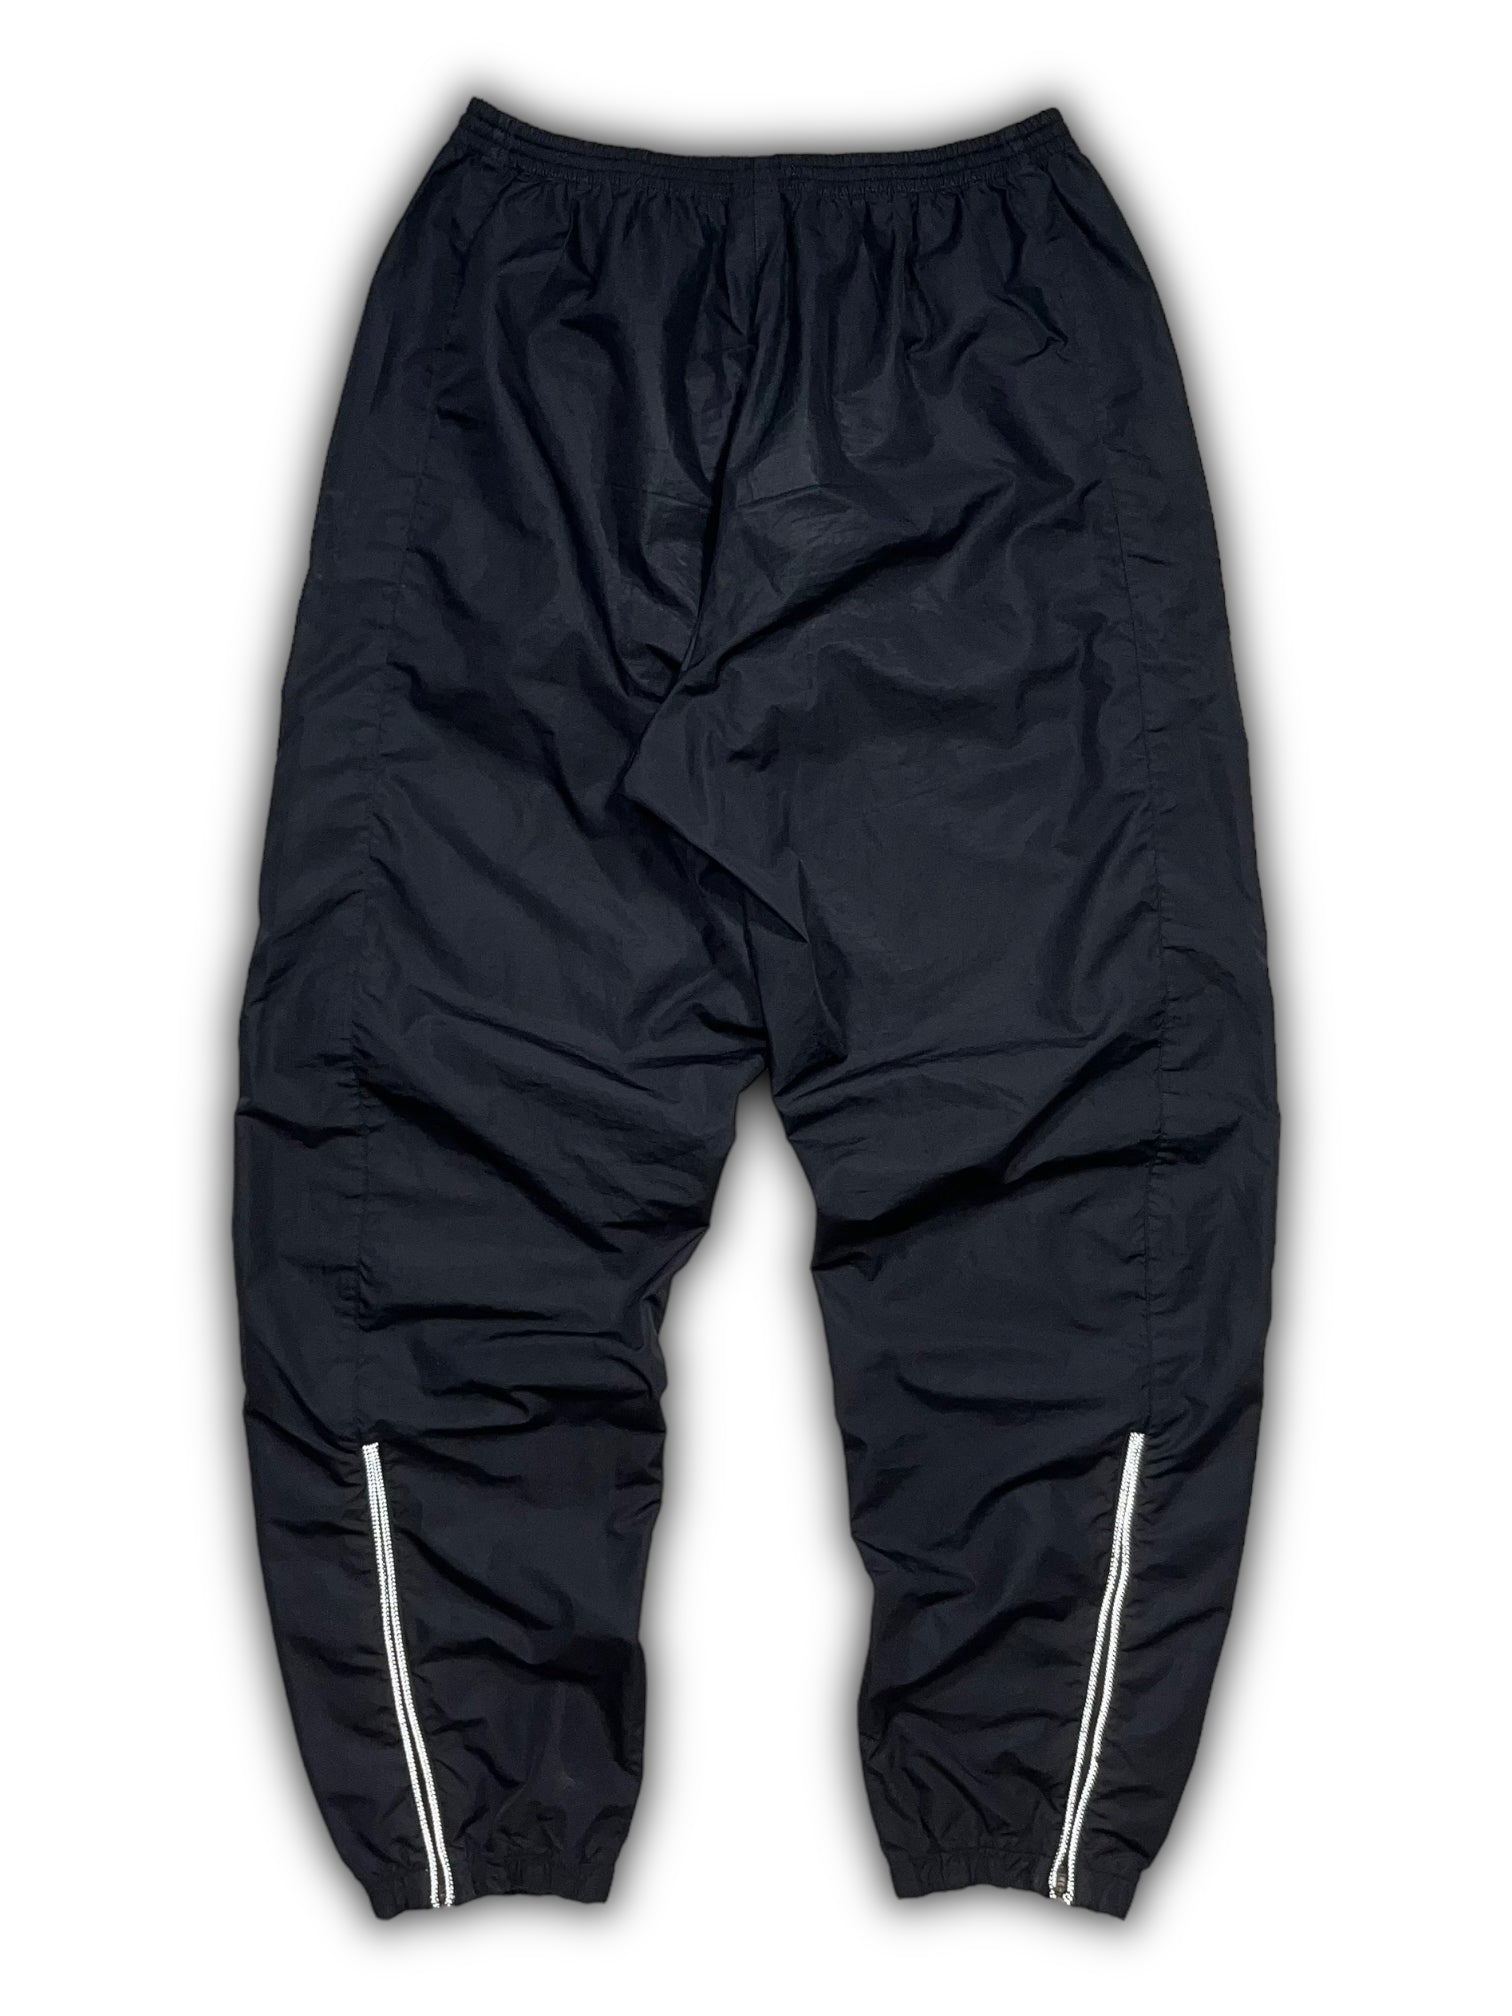 Nike parachute pants Black - $35 (41% Off Retail) - From Alexis